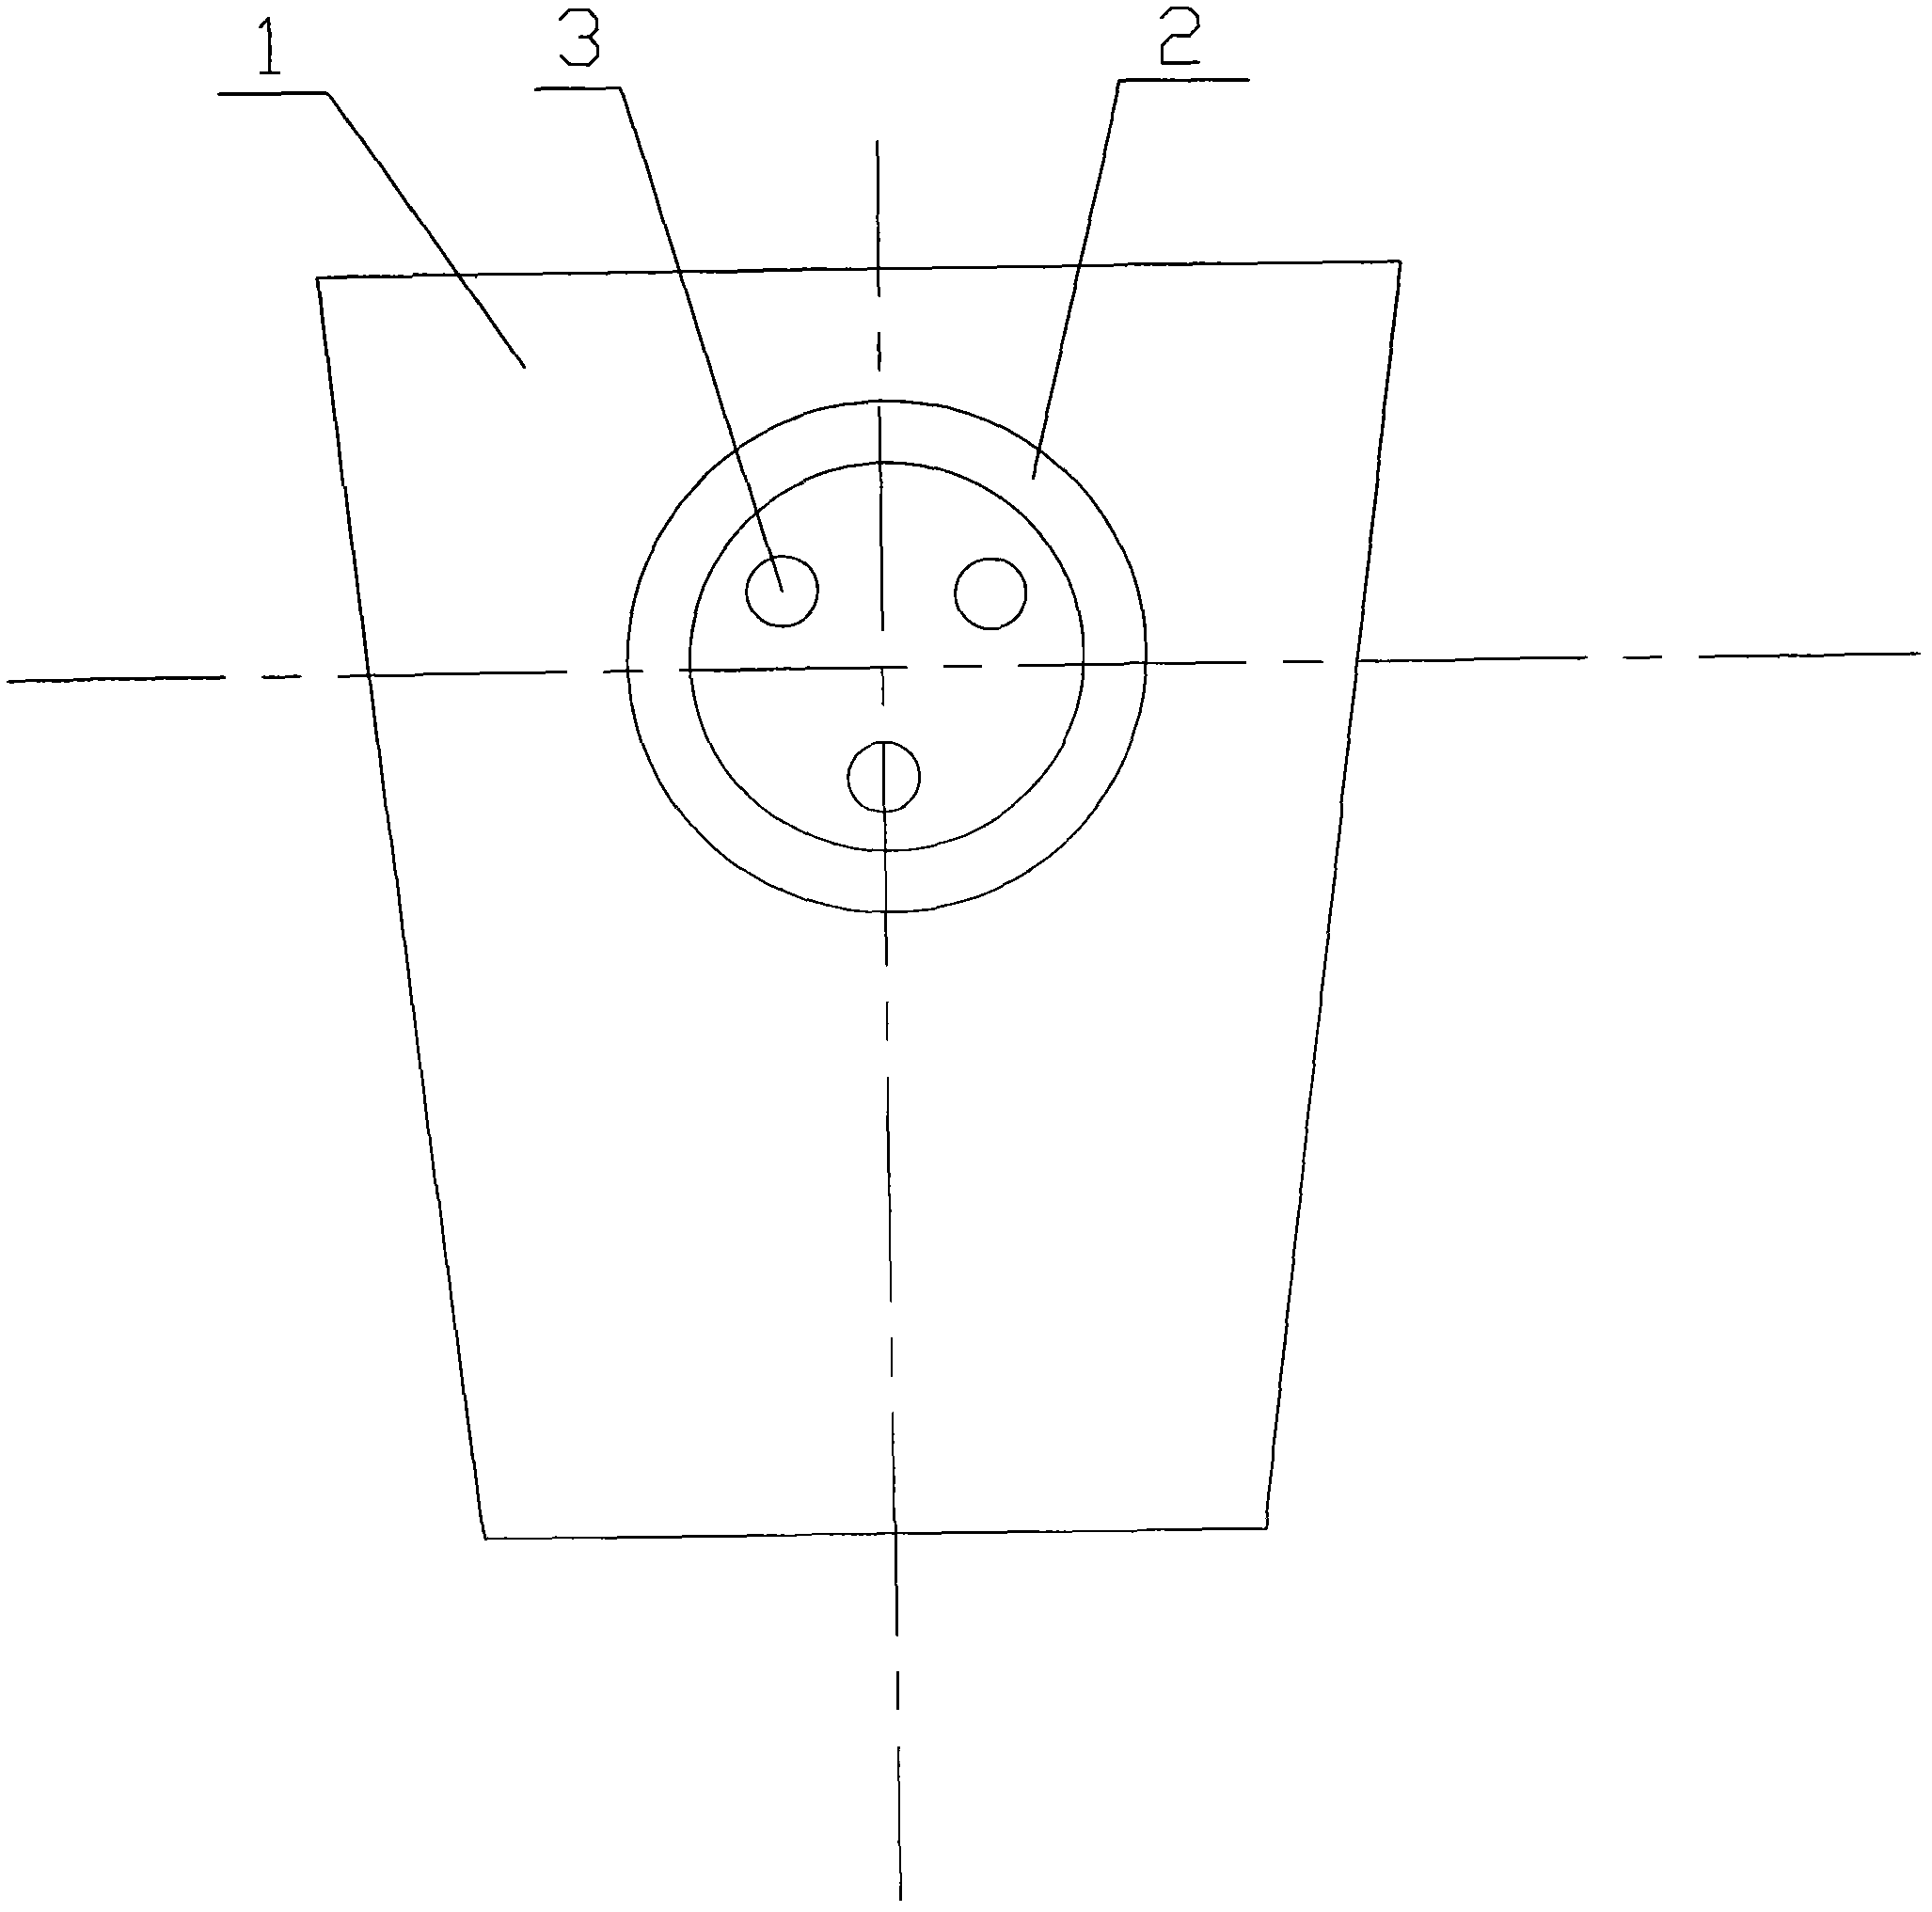 Process method for replacing trunnion of ladle